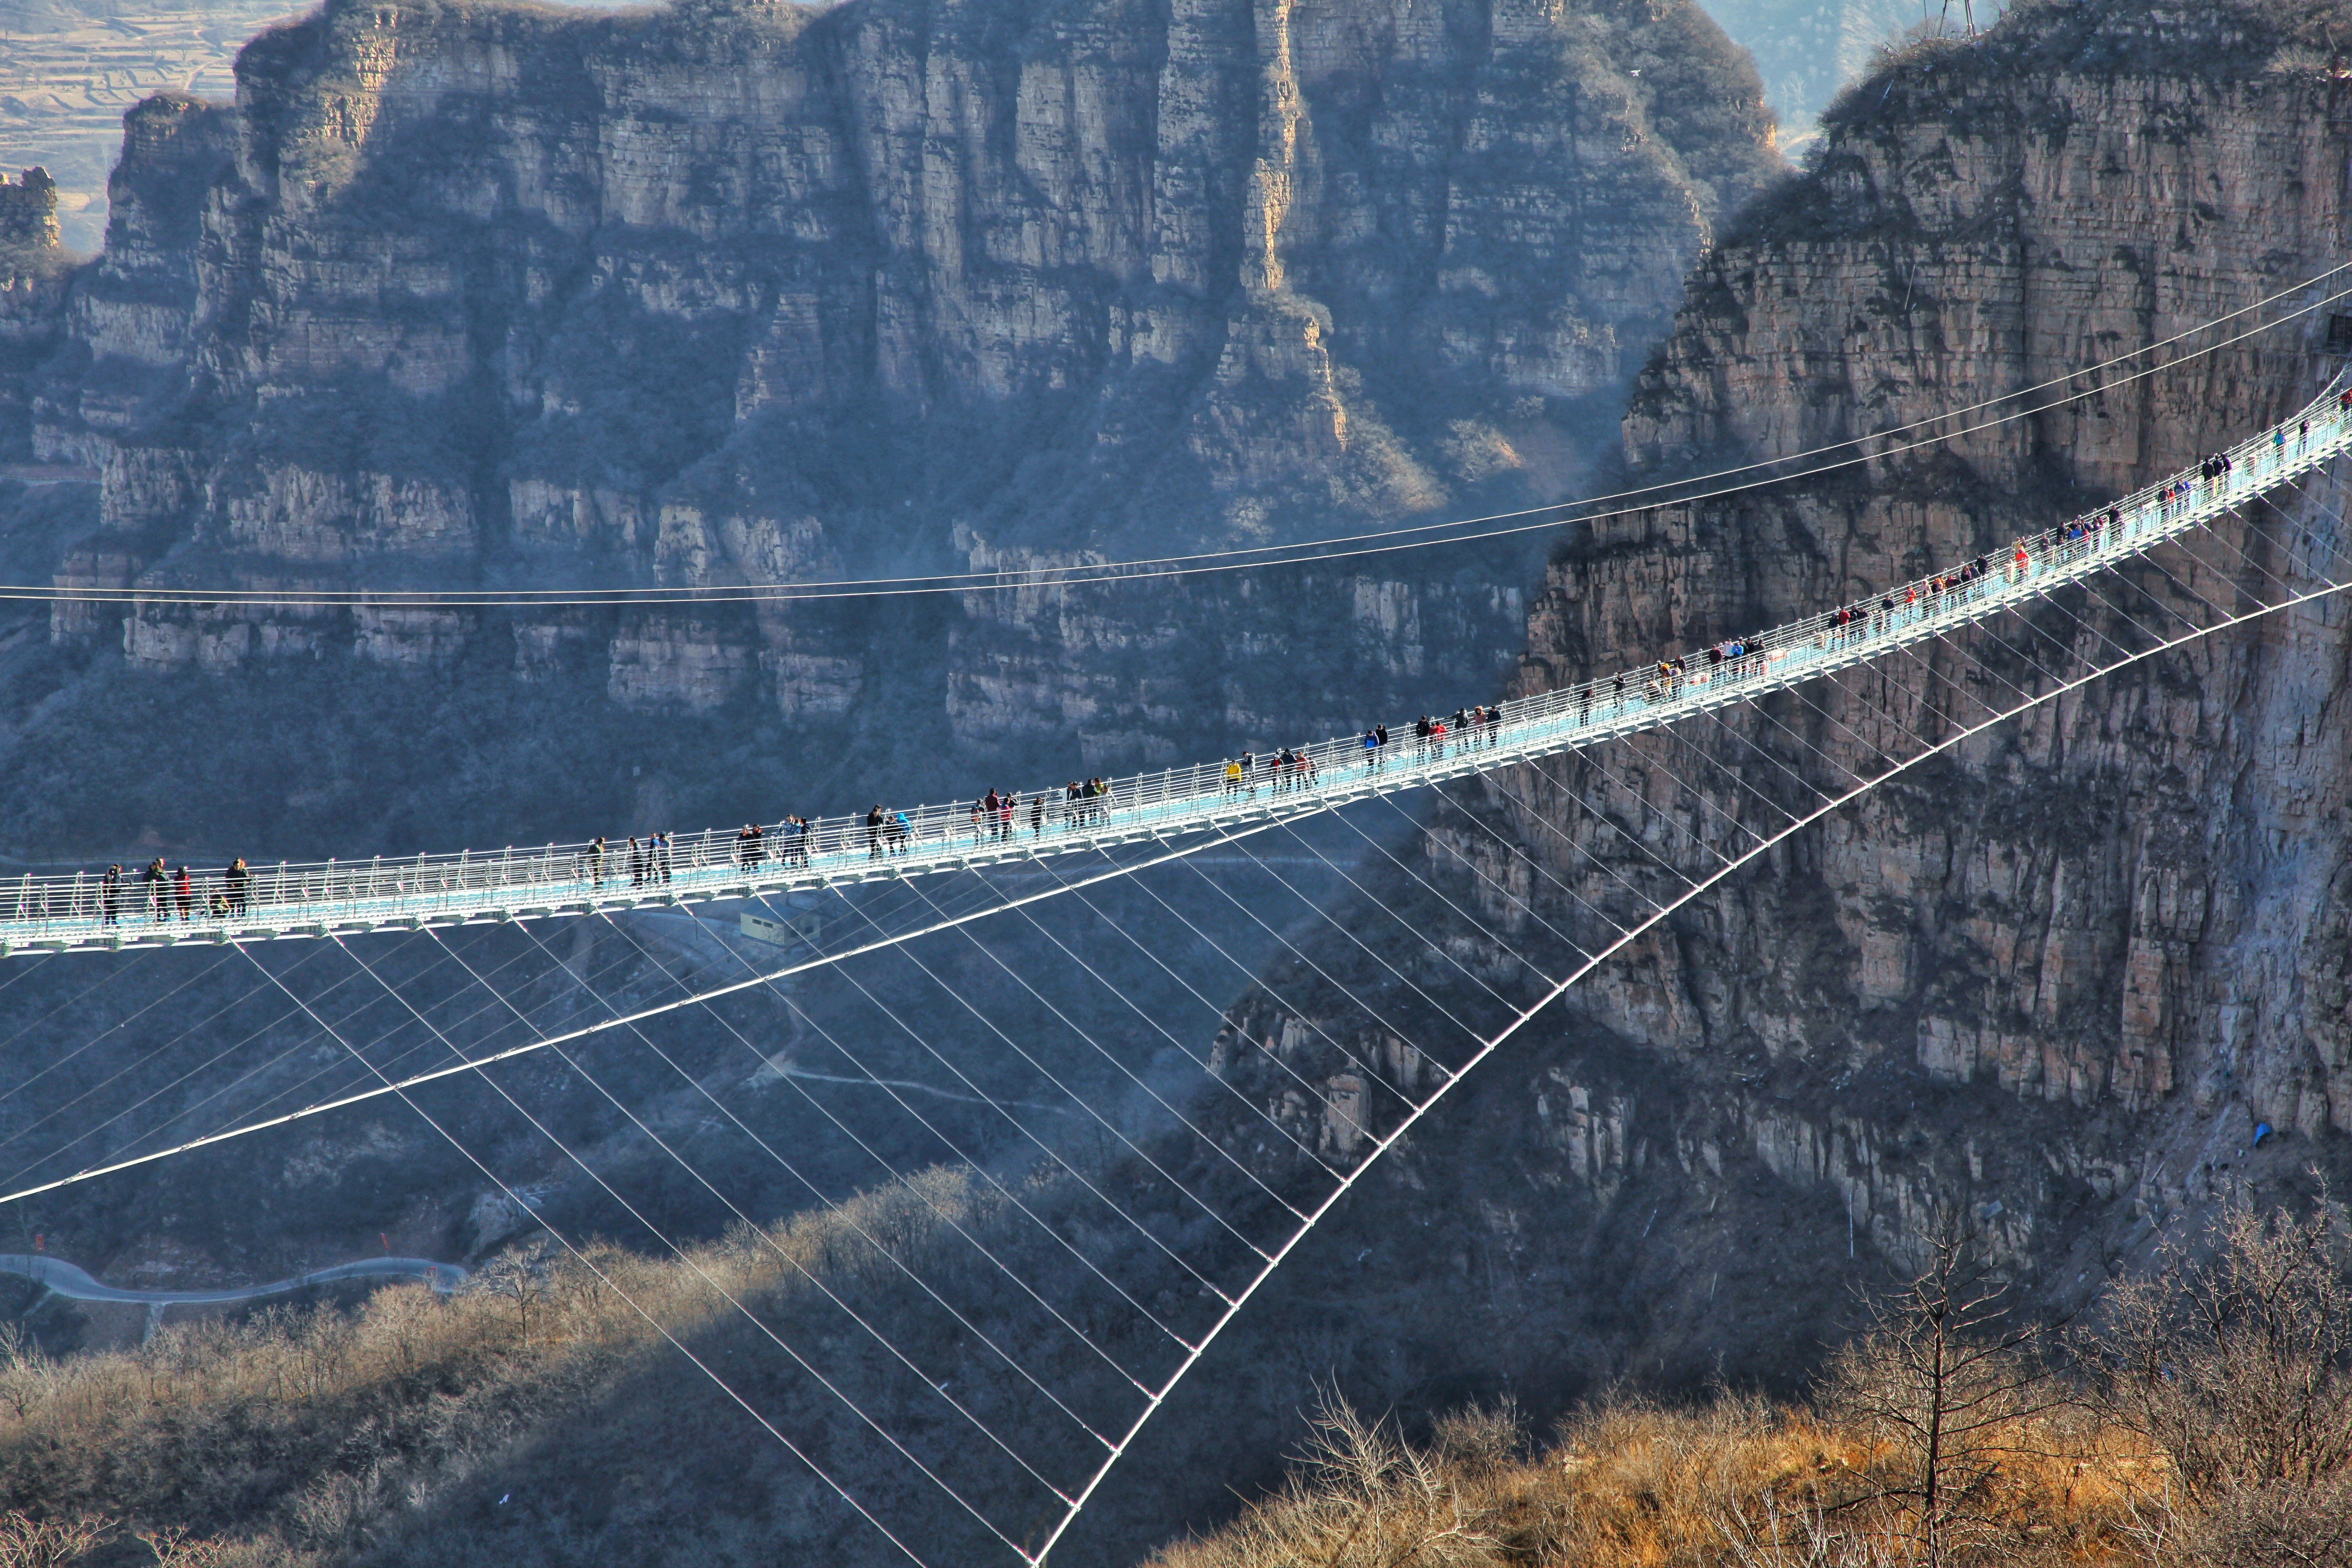 The glass suspension bridge at Hongyagu Scenic Area in Pingshan county, Hebei province. Photo: Xinhua